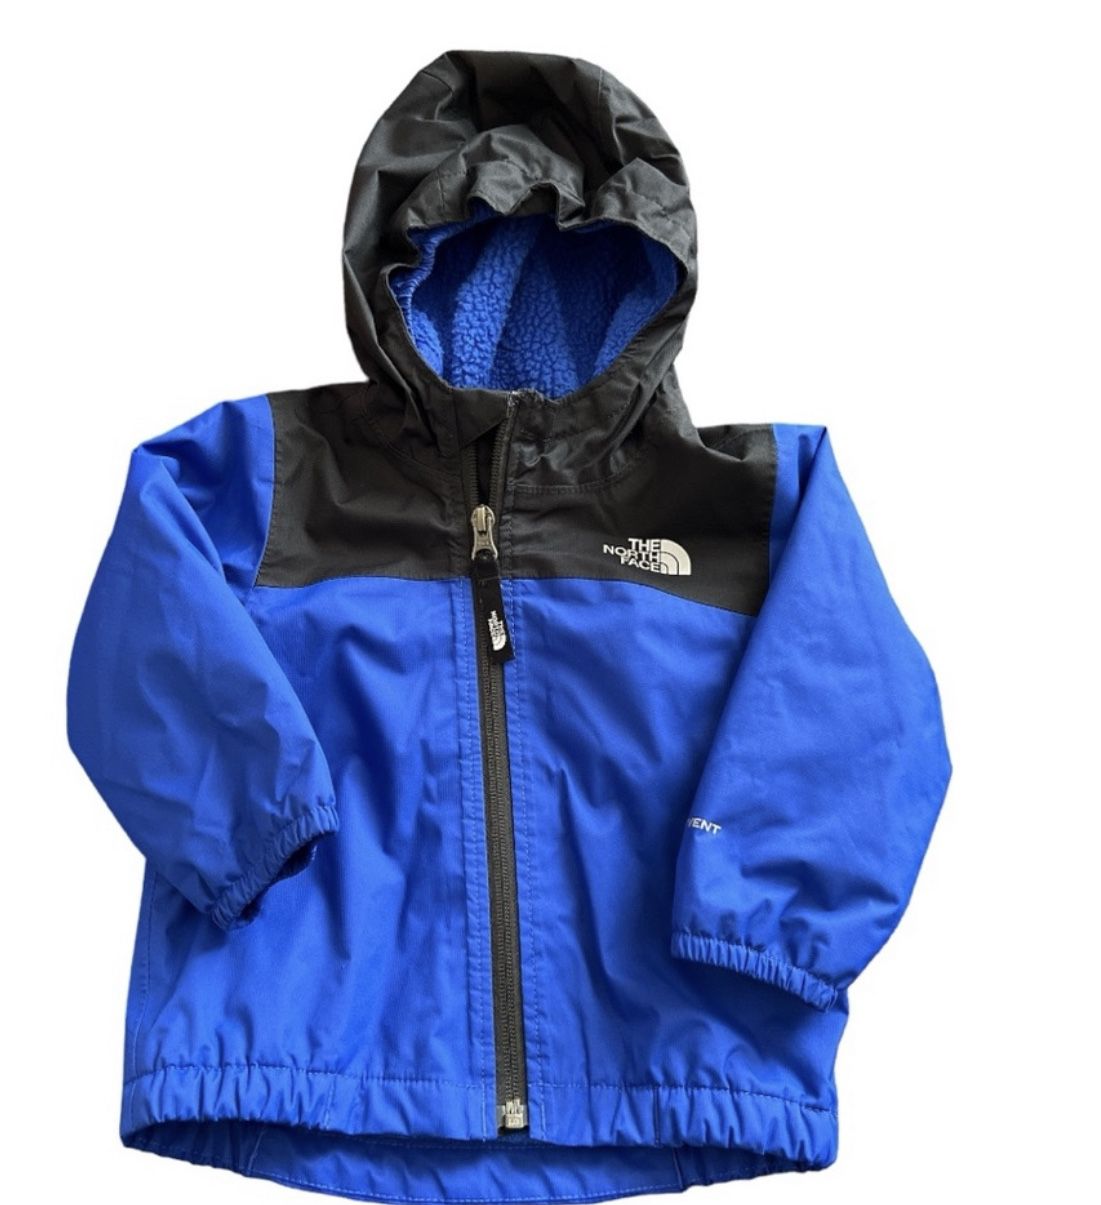 THE NORTH FACE Infant Warm Storm Jacket